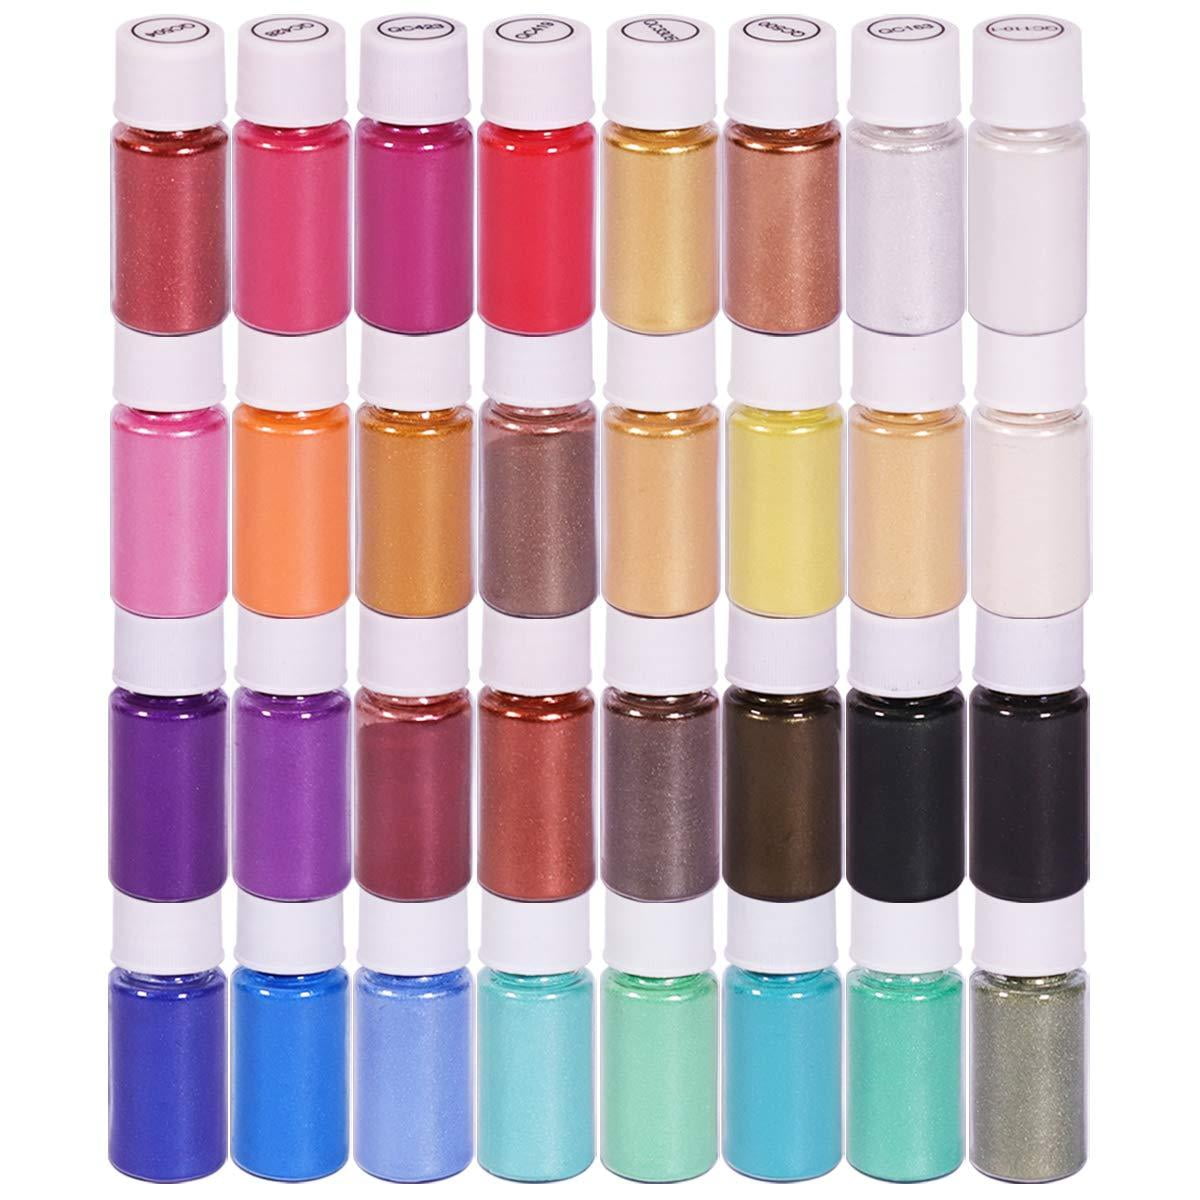 Cosmetic Grade Mica Powder 24x0.15 Oz Color Set Assortment - Organic  Coloring Pigment for Epoxy, Soap Making, Lip Gloss, Body Butter, Candle  Making